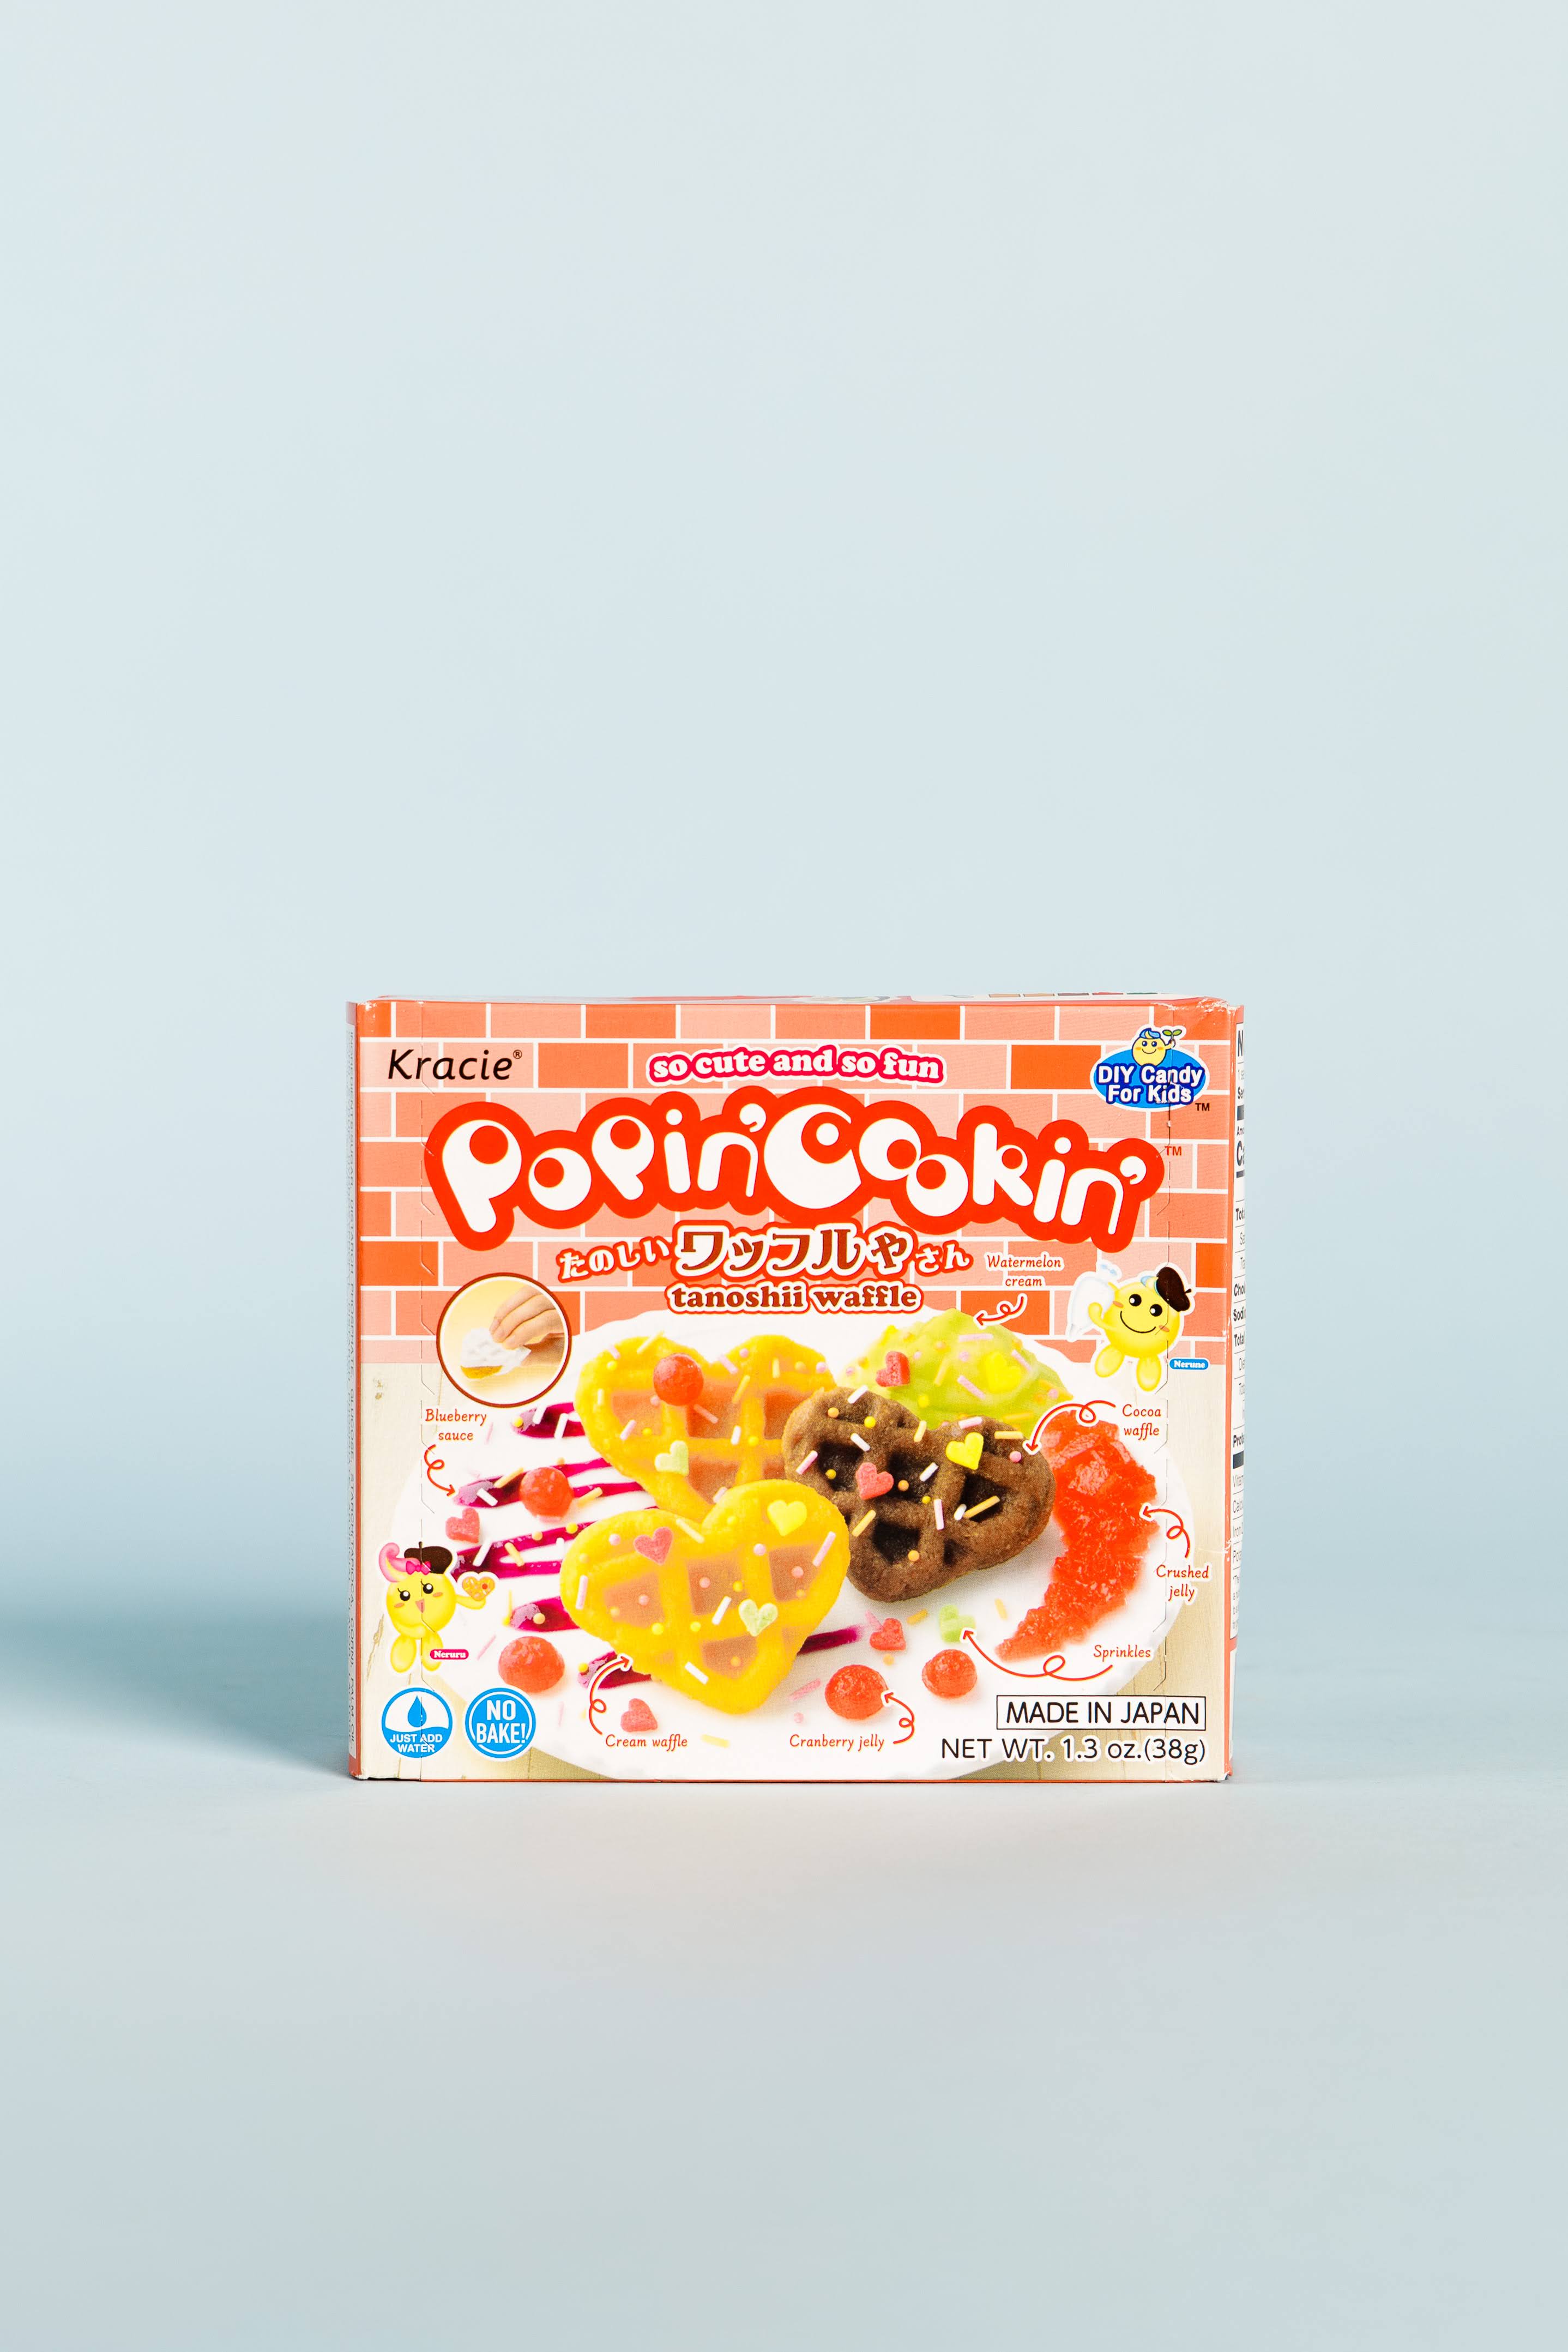 7 Popin Cookin and Interesting Japanese Candy Japan Souvenir DIY Candy 